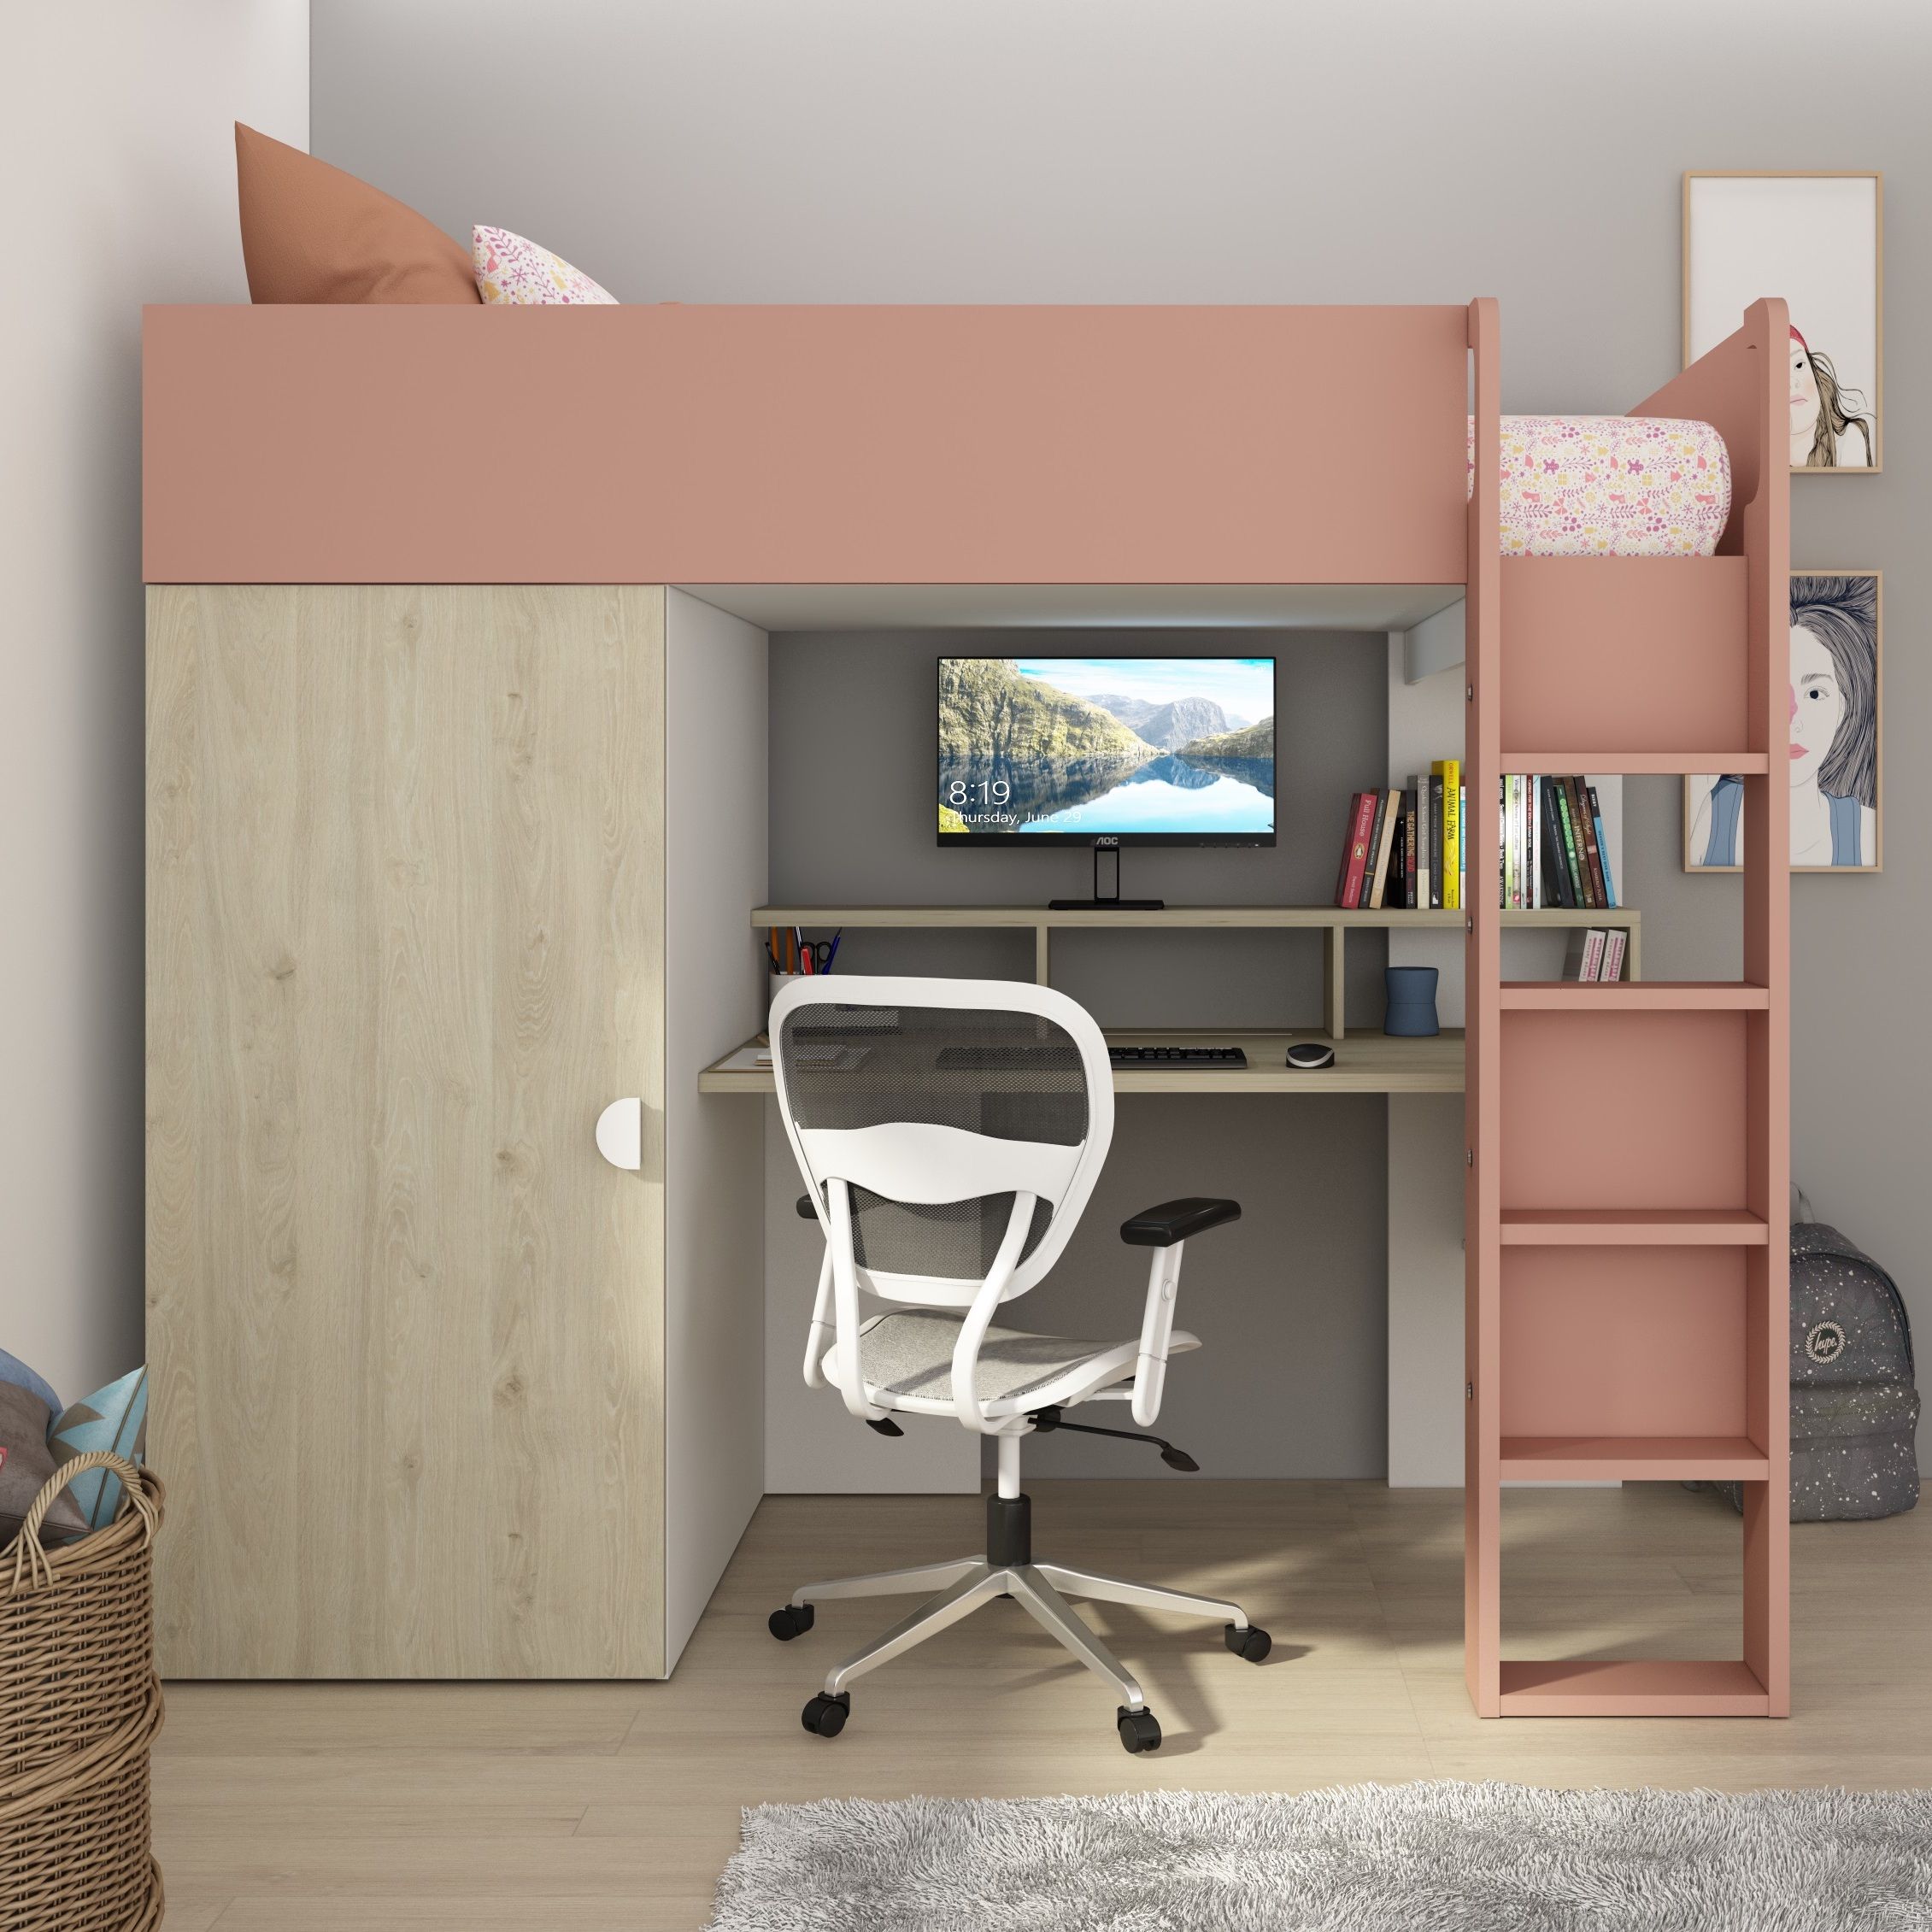 Flow High Sleeper Bed – Oak/pinktrasman • Nest Designs For High Sleeper Bed With Wardrobes (View 6 of 8)